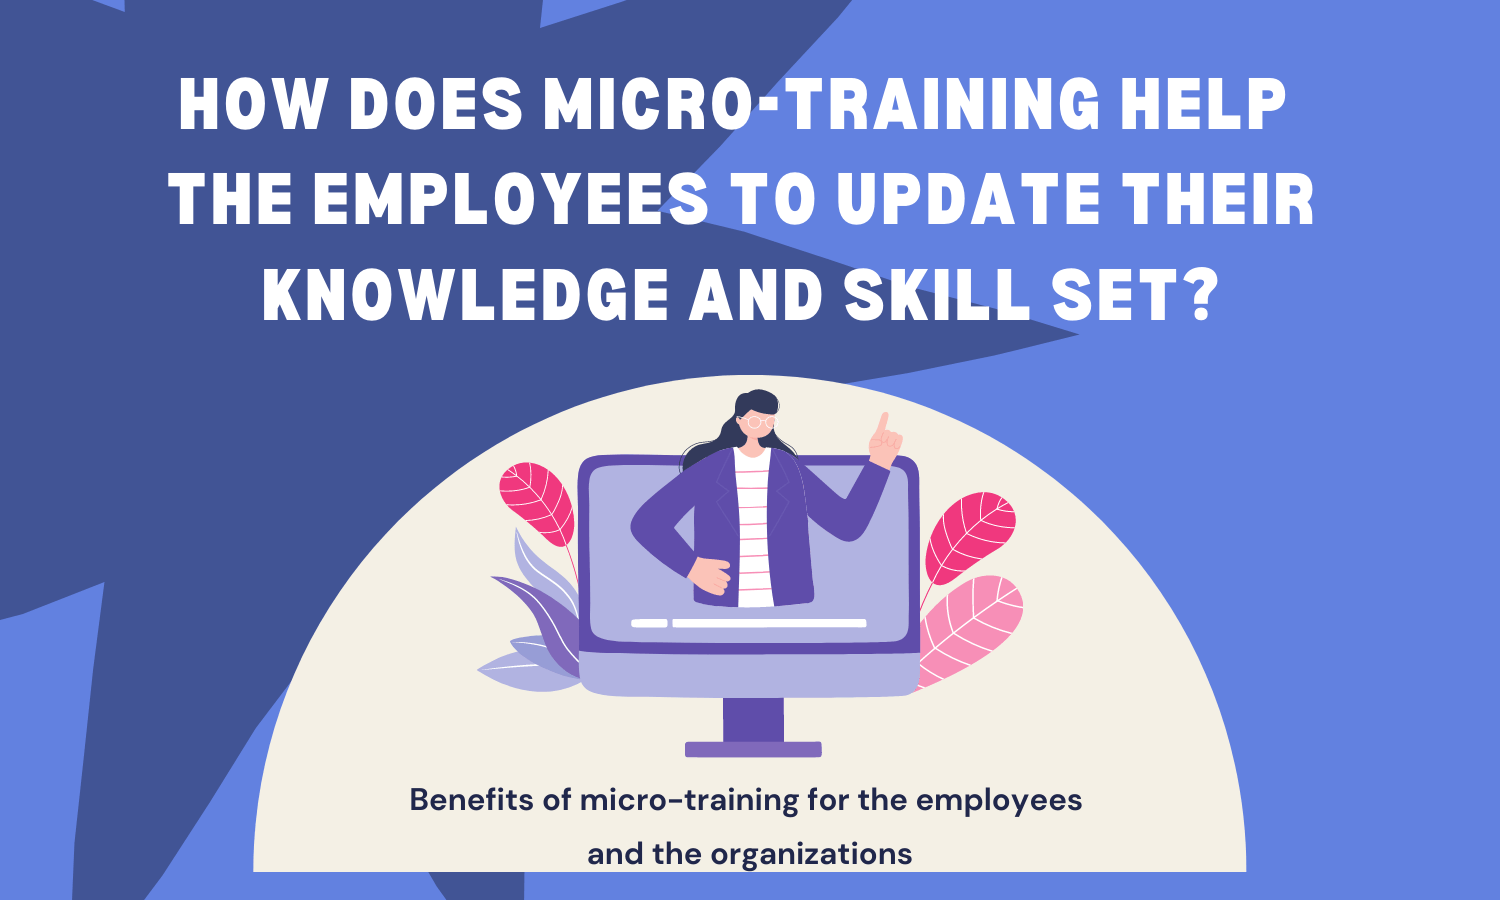 How does micro-training help the employees to update their knowledge and skill set